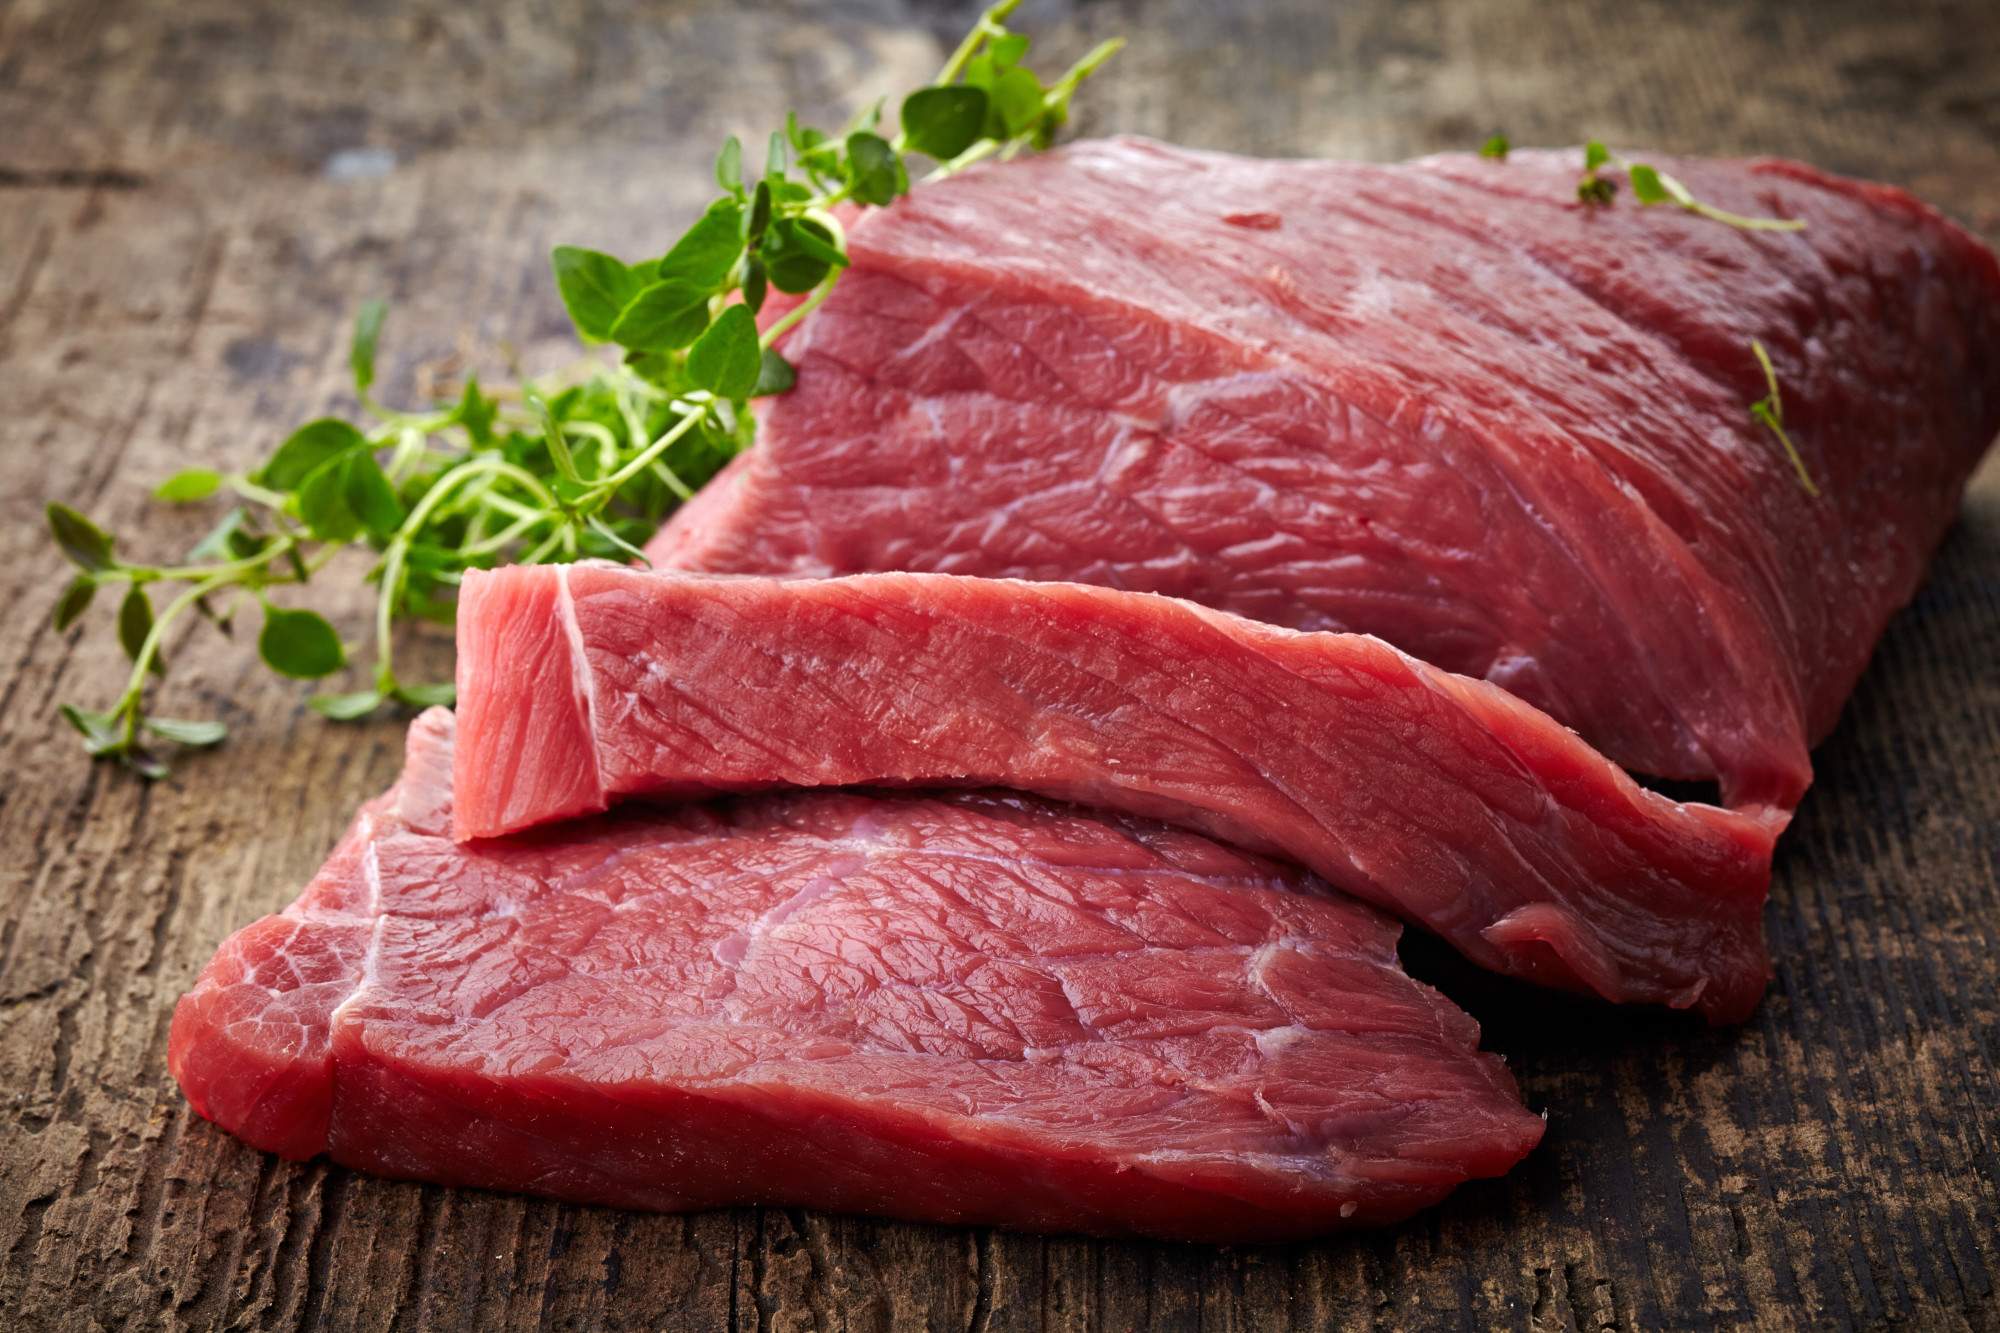 Meat Quality Matters: Does Ethically-Sourced Meat Taste Better?